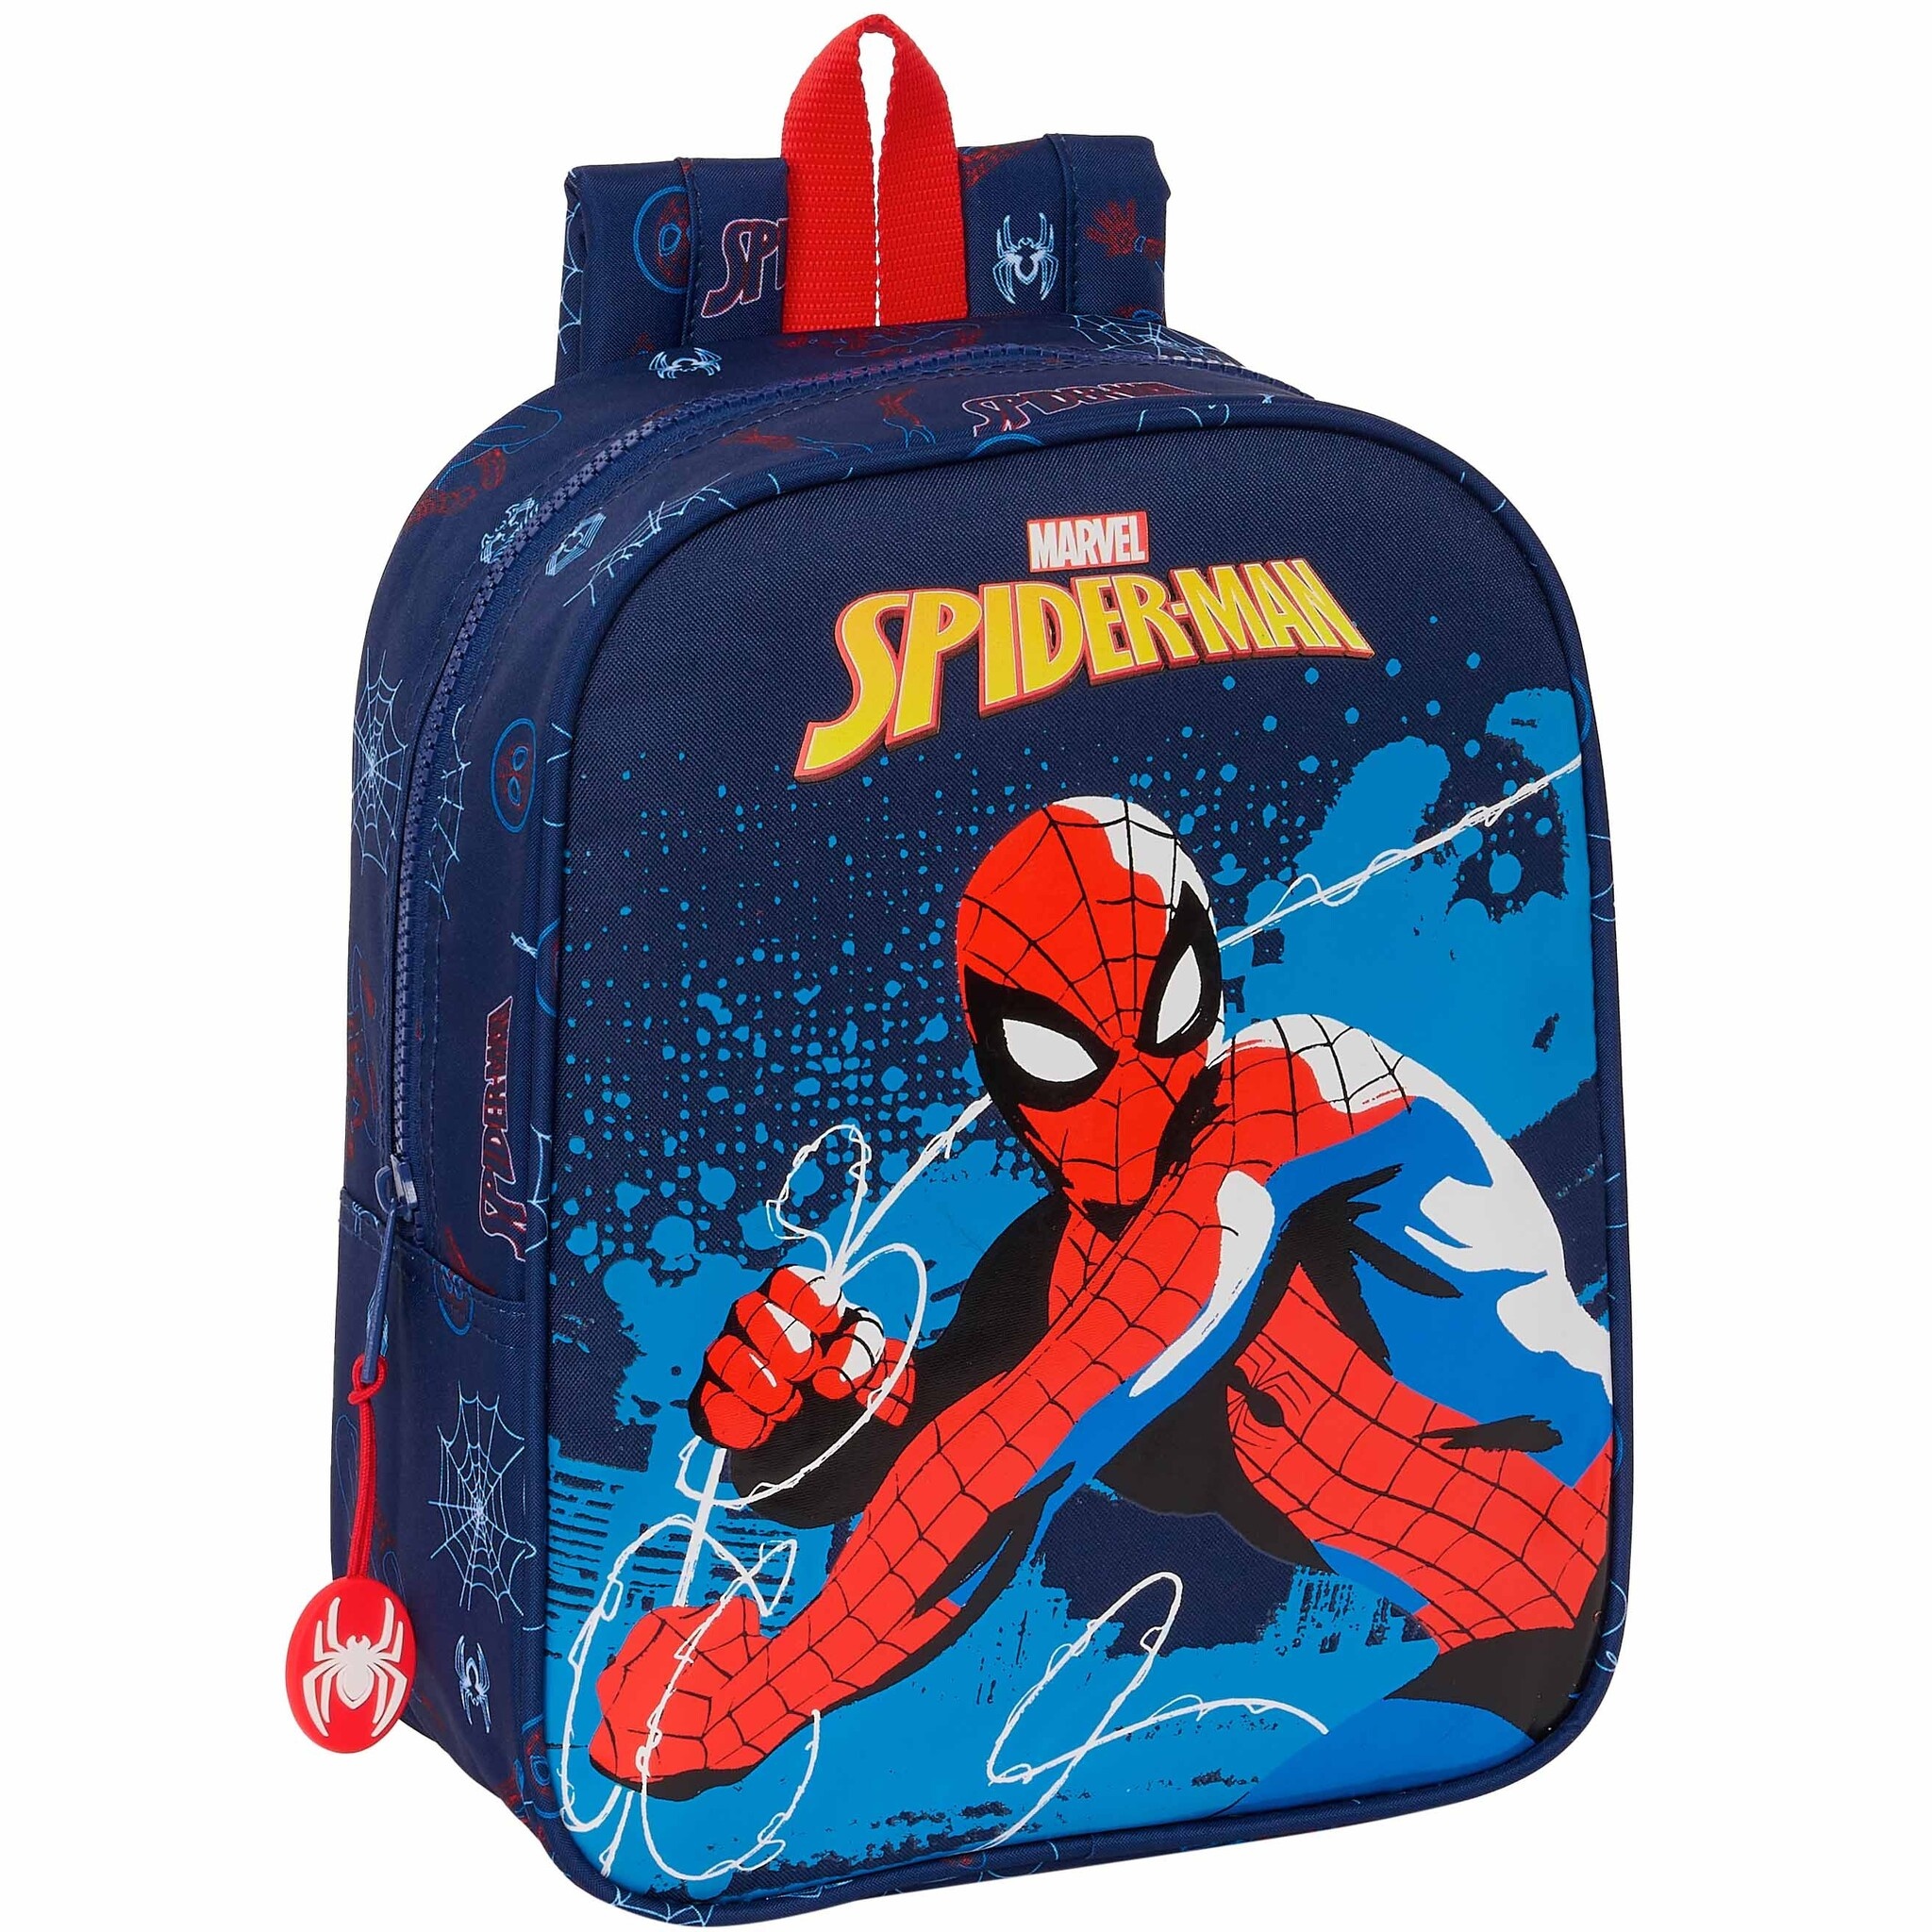 Spiderman Toddler backpack, Neon - 27 x 22 x 10 cm - Polyester